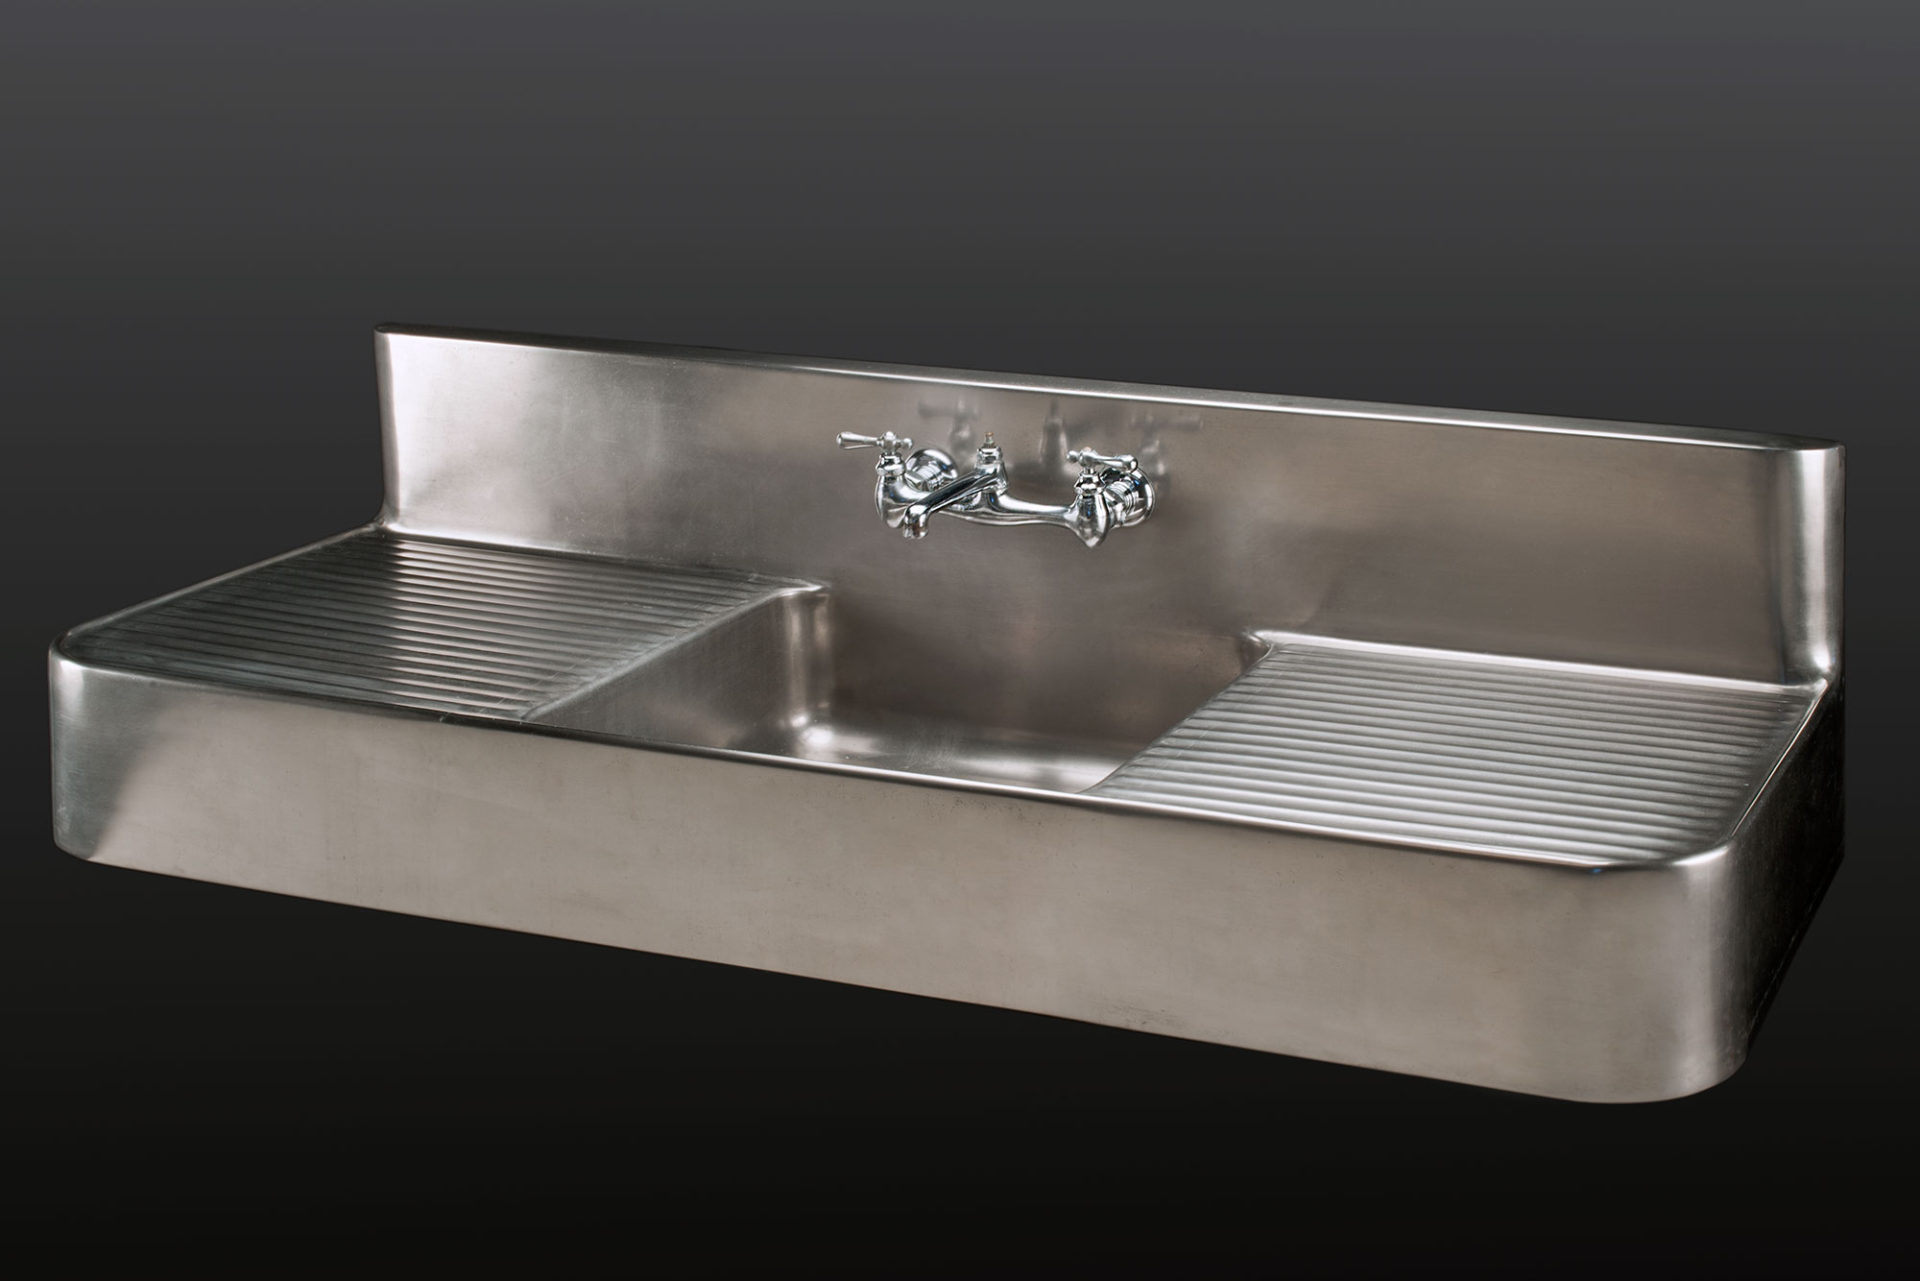 Wide metal sink with drainage boards on both sides of the rectangular basin and handles and faucet set at the center of a rectangular backsplash.